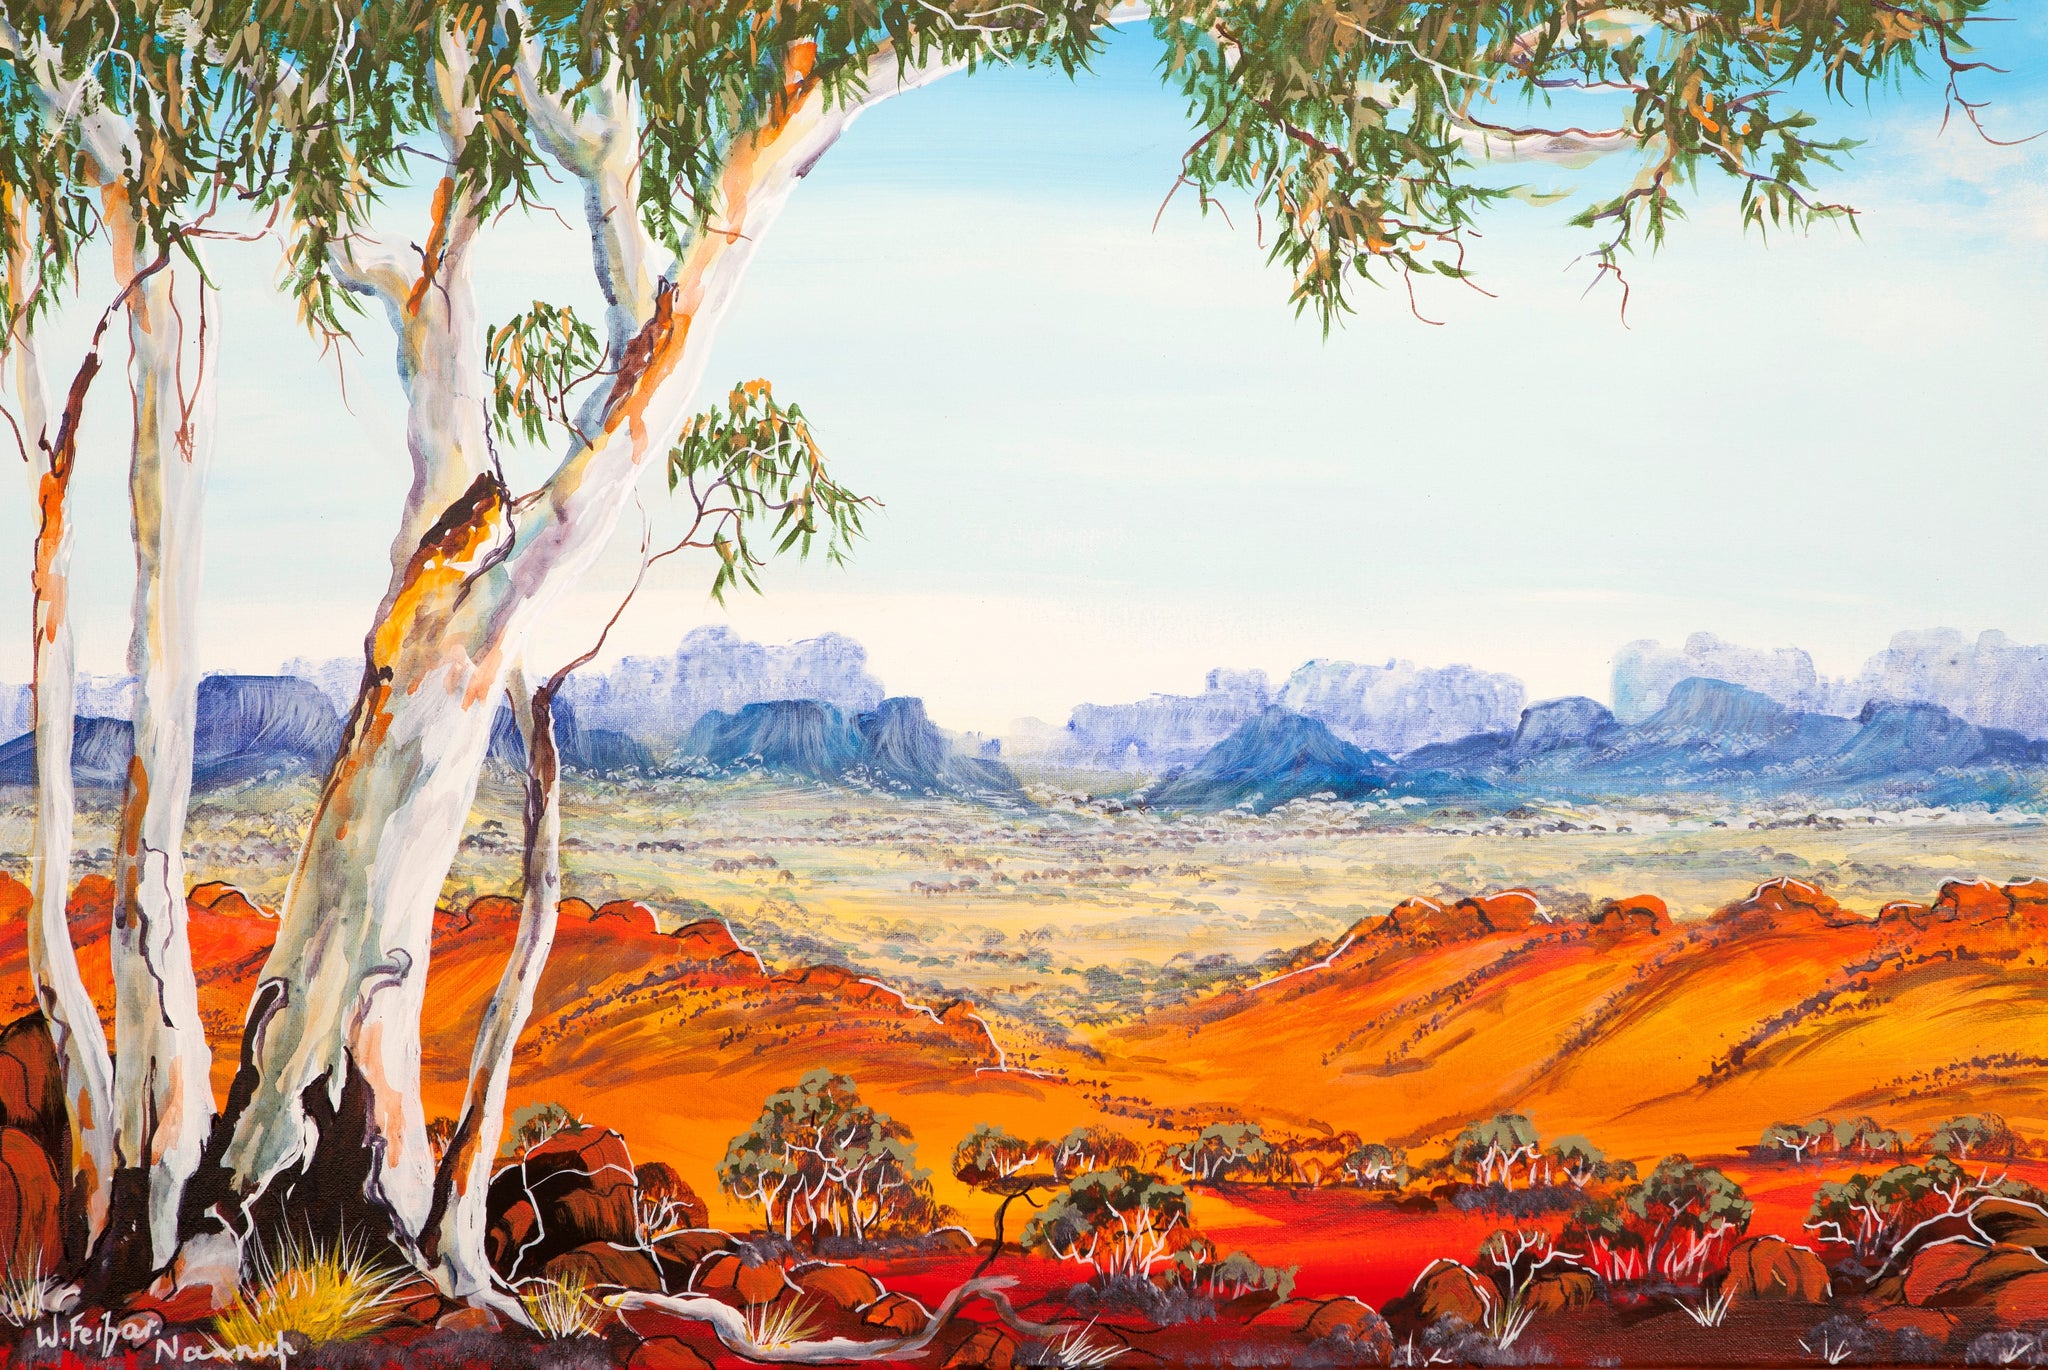 "My Country" Landscapes by Wendy Feifar Nannup & Jumbindi